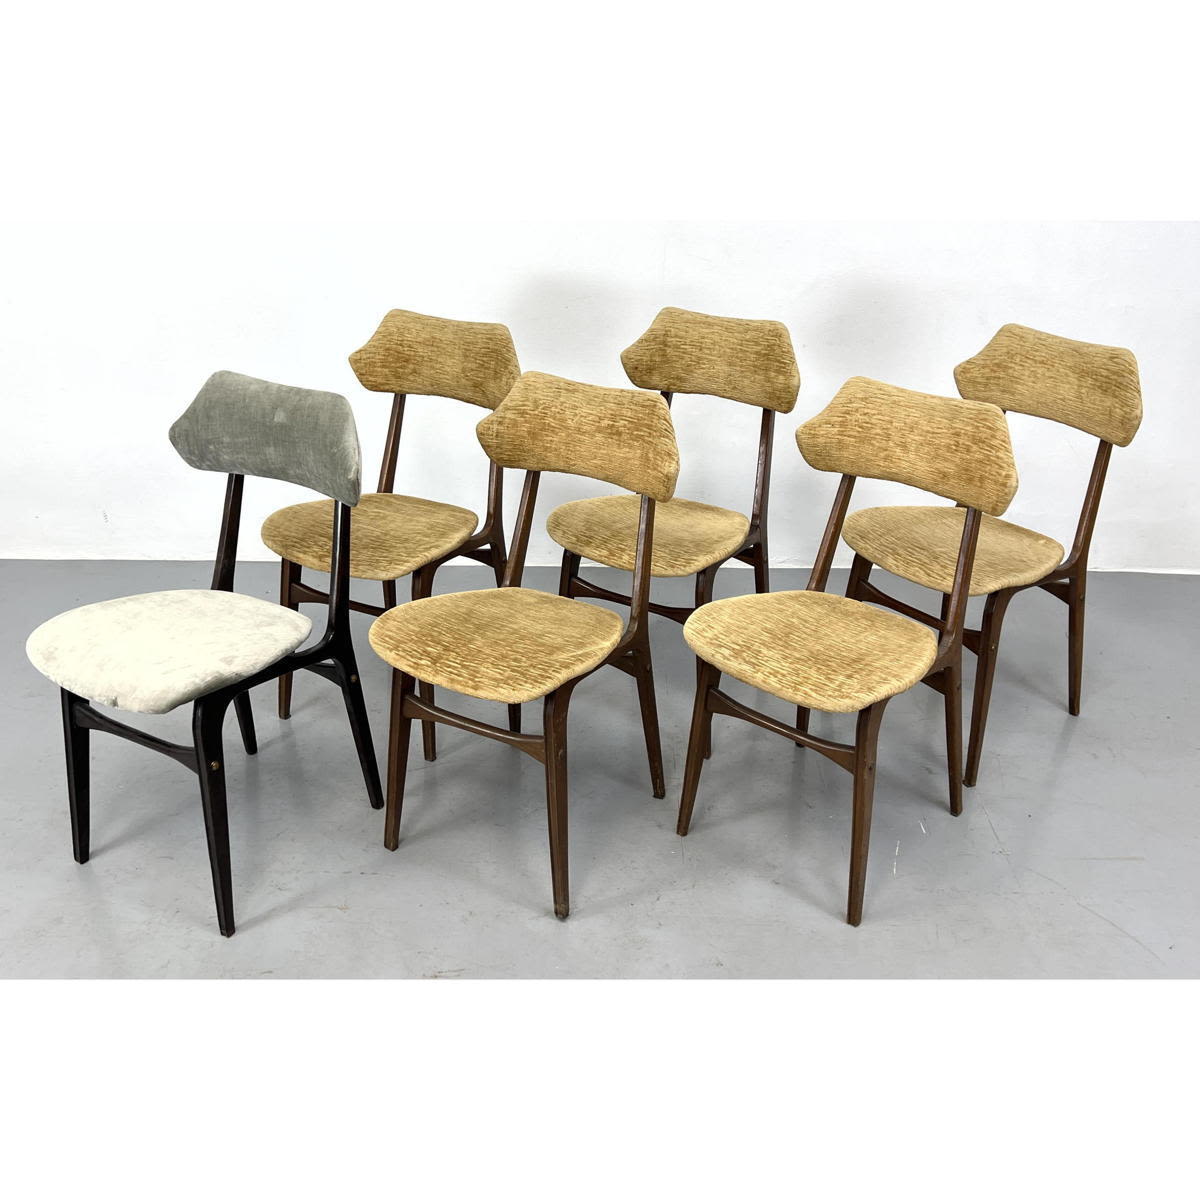 Set 6 Italian dining chairs 1960 s 2a76ce